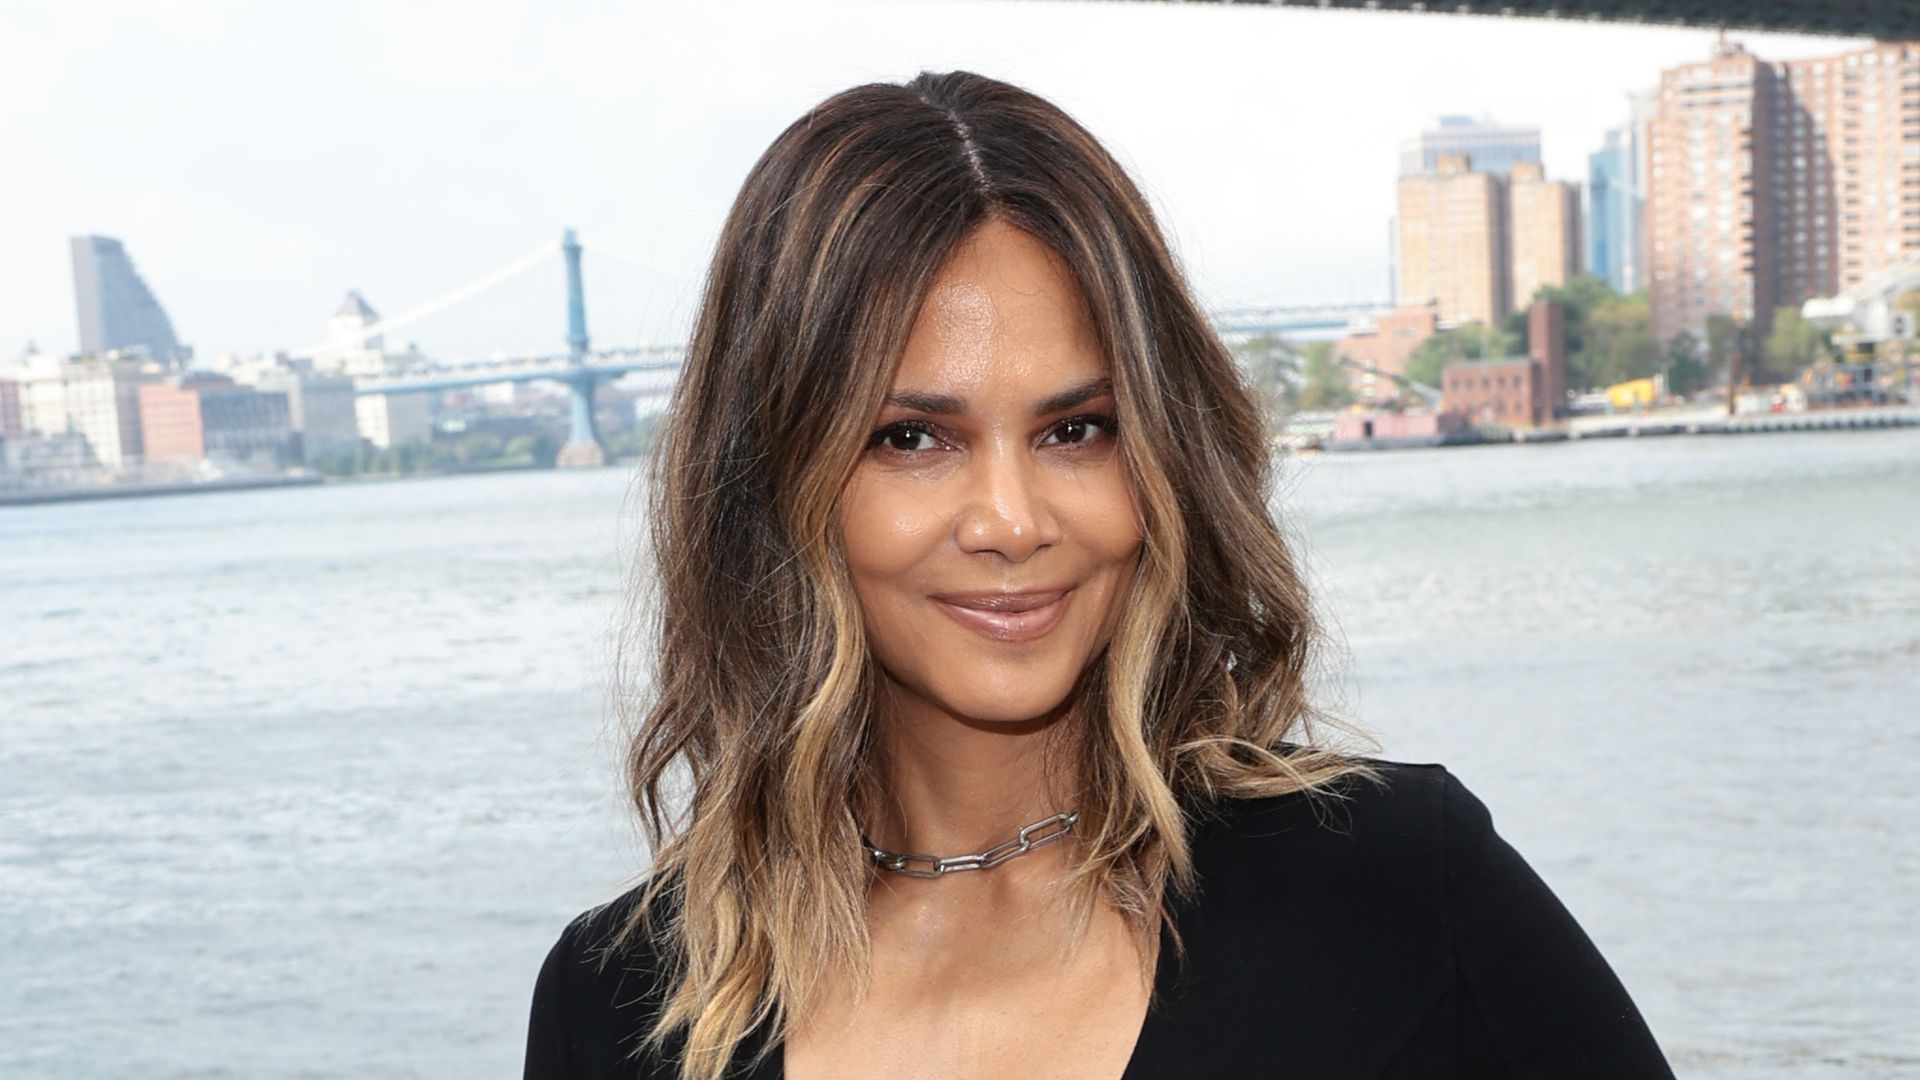 Halle Berry puts toned beach body on display in plunging black swimsuit